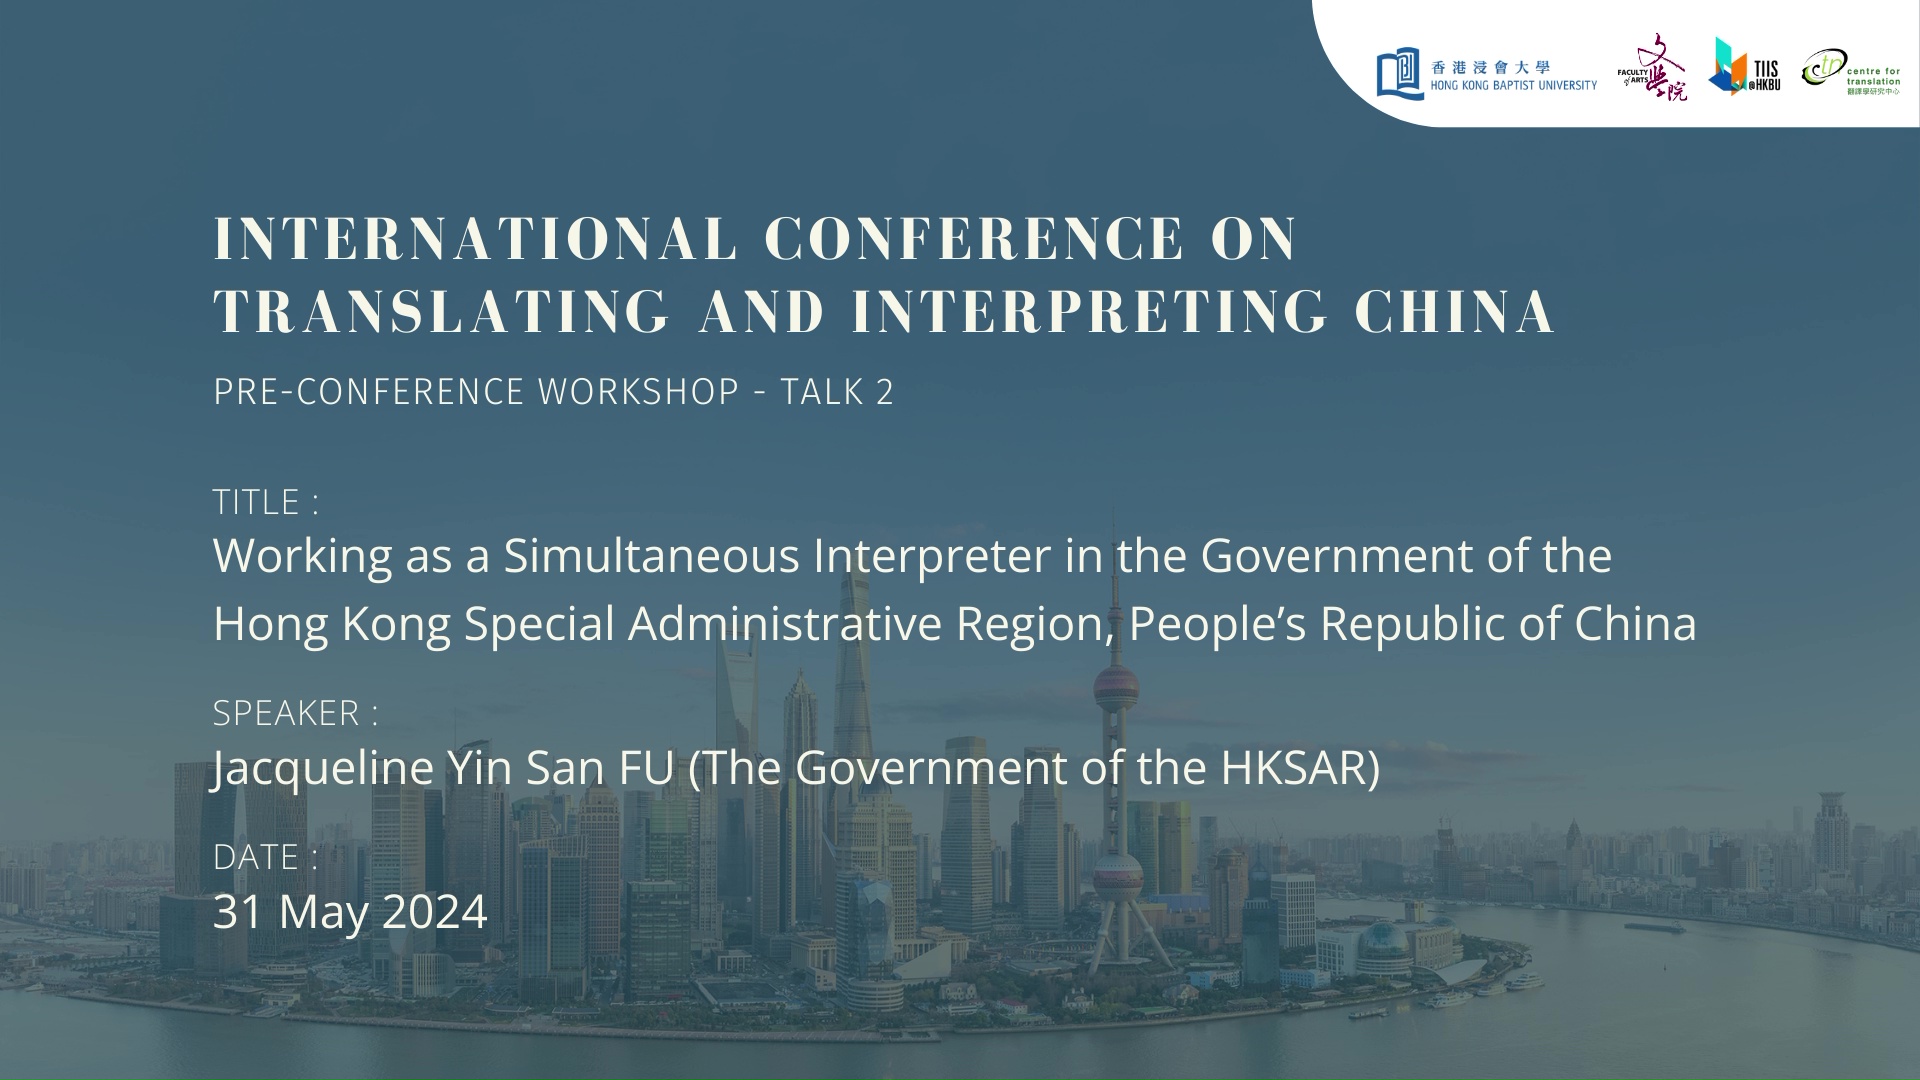 Working as a Simultaneous Interpreter in the Government of the Hong Kong Special Administrative Region, People's Republic of China